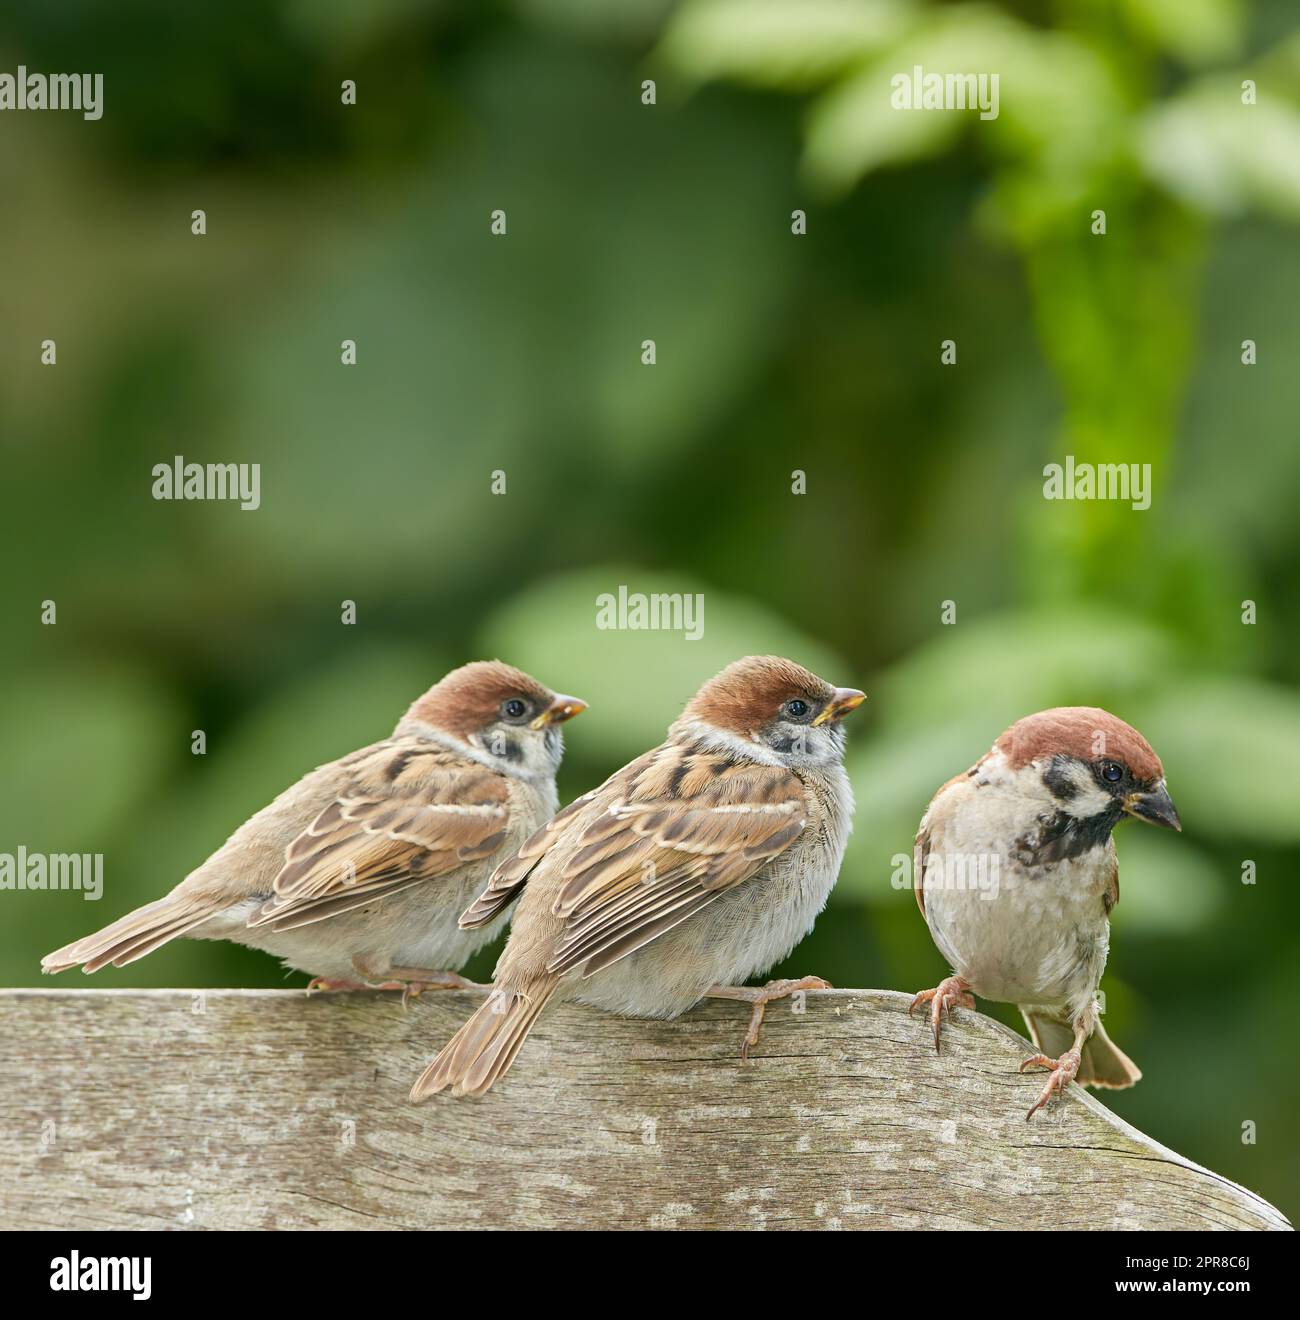 Sparrows are a family of small passerine birds, Passeridae. They are also known as true sparrows, or Old World sparrows, names also used for a particular genus of the family, Passer. Stock Photo